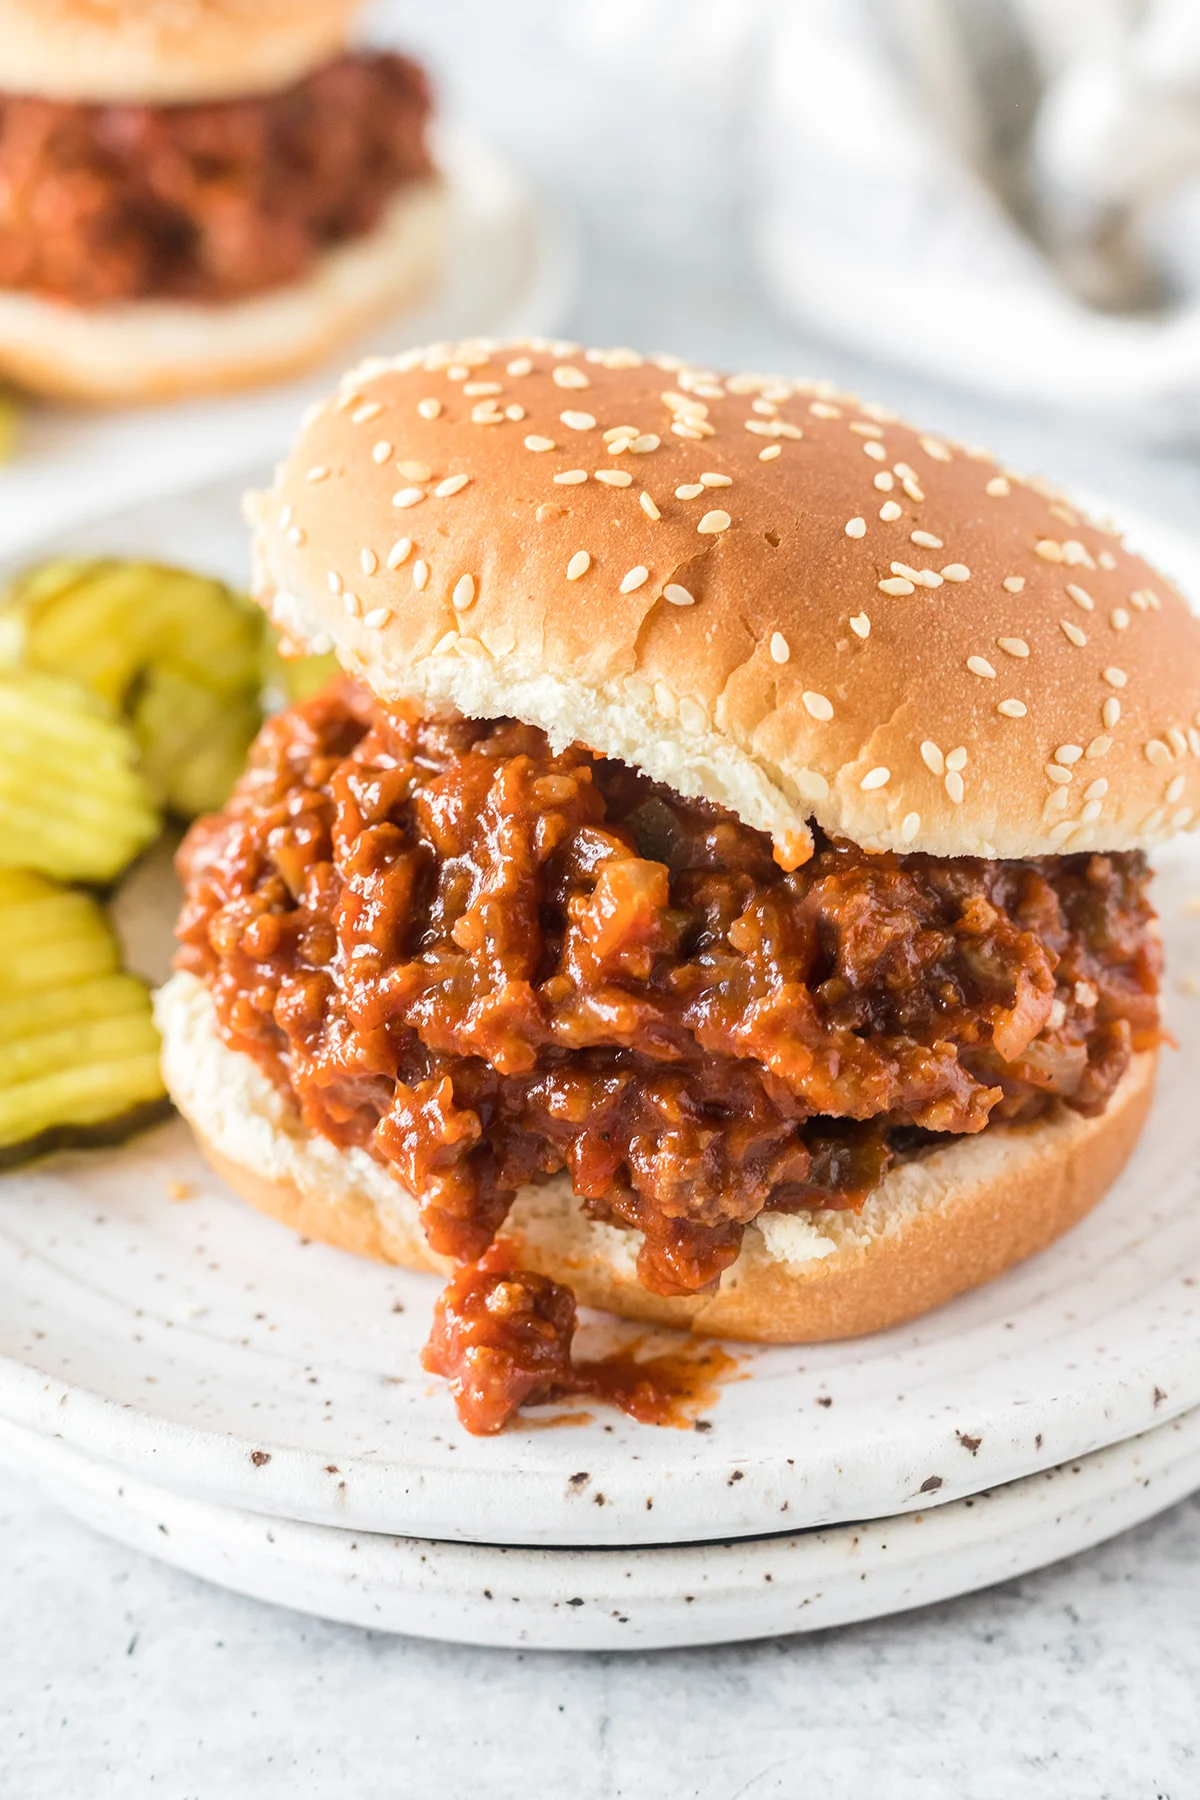 classic sloppy joe served on a sesame bun with pickles on the side